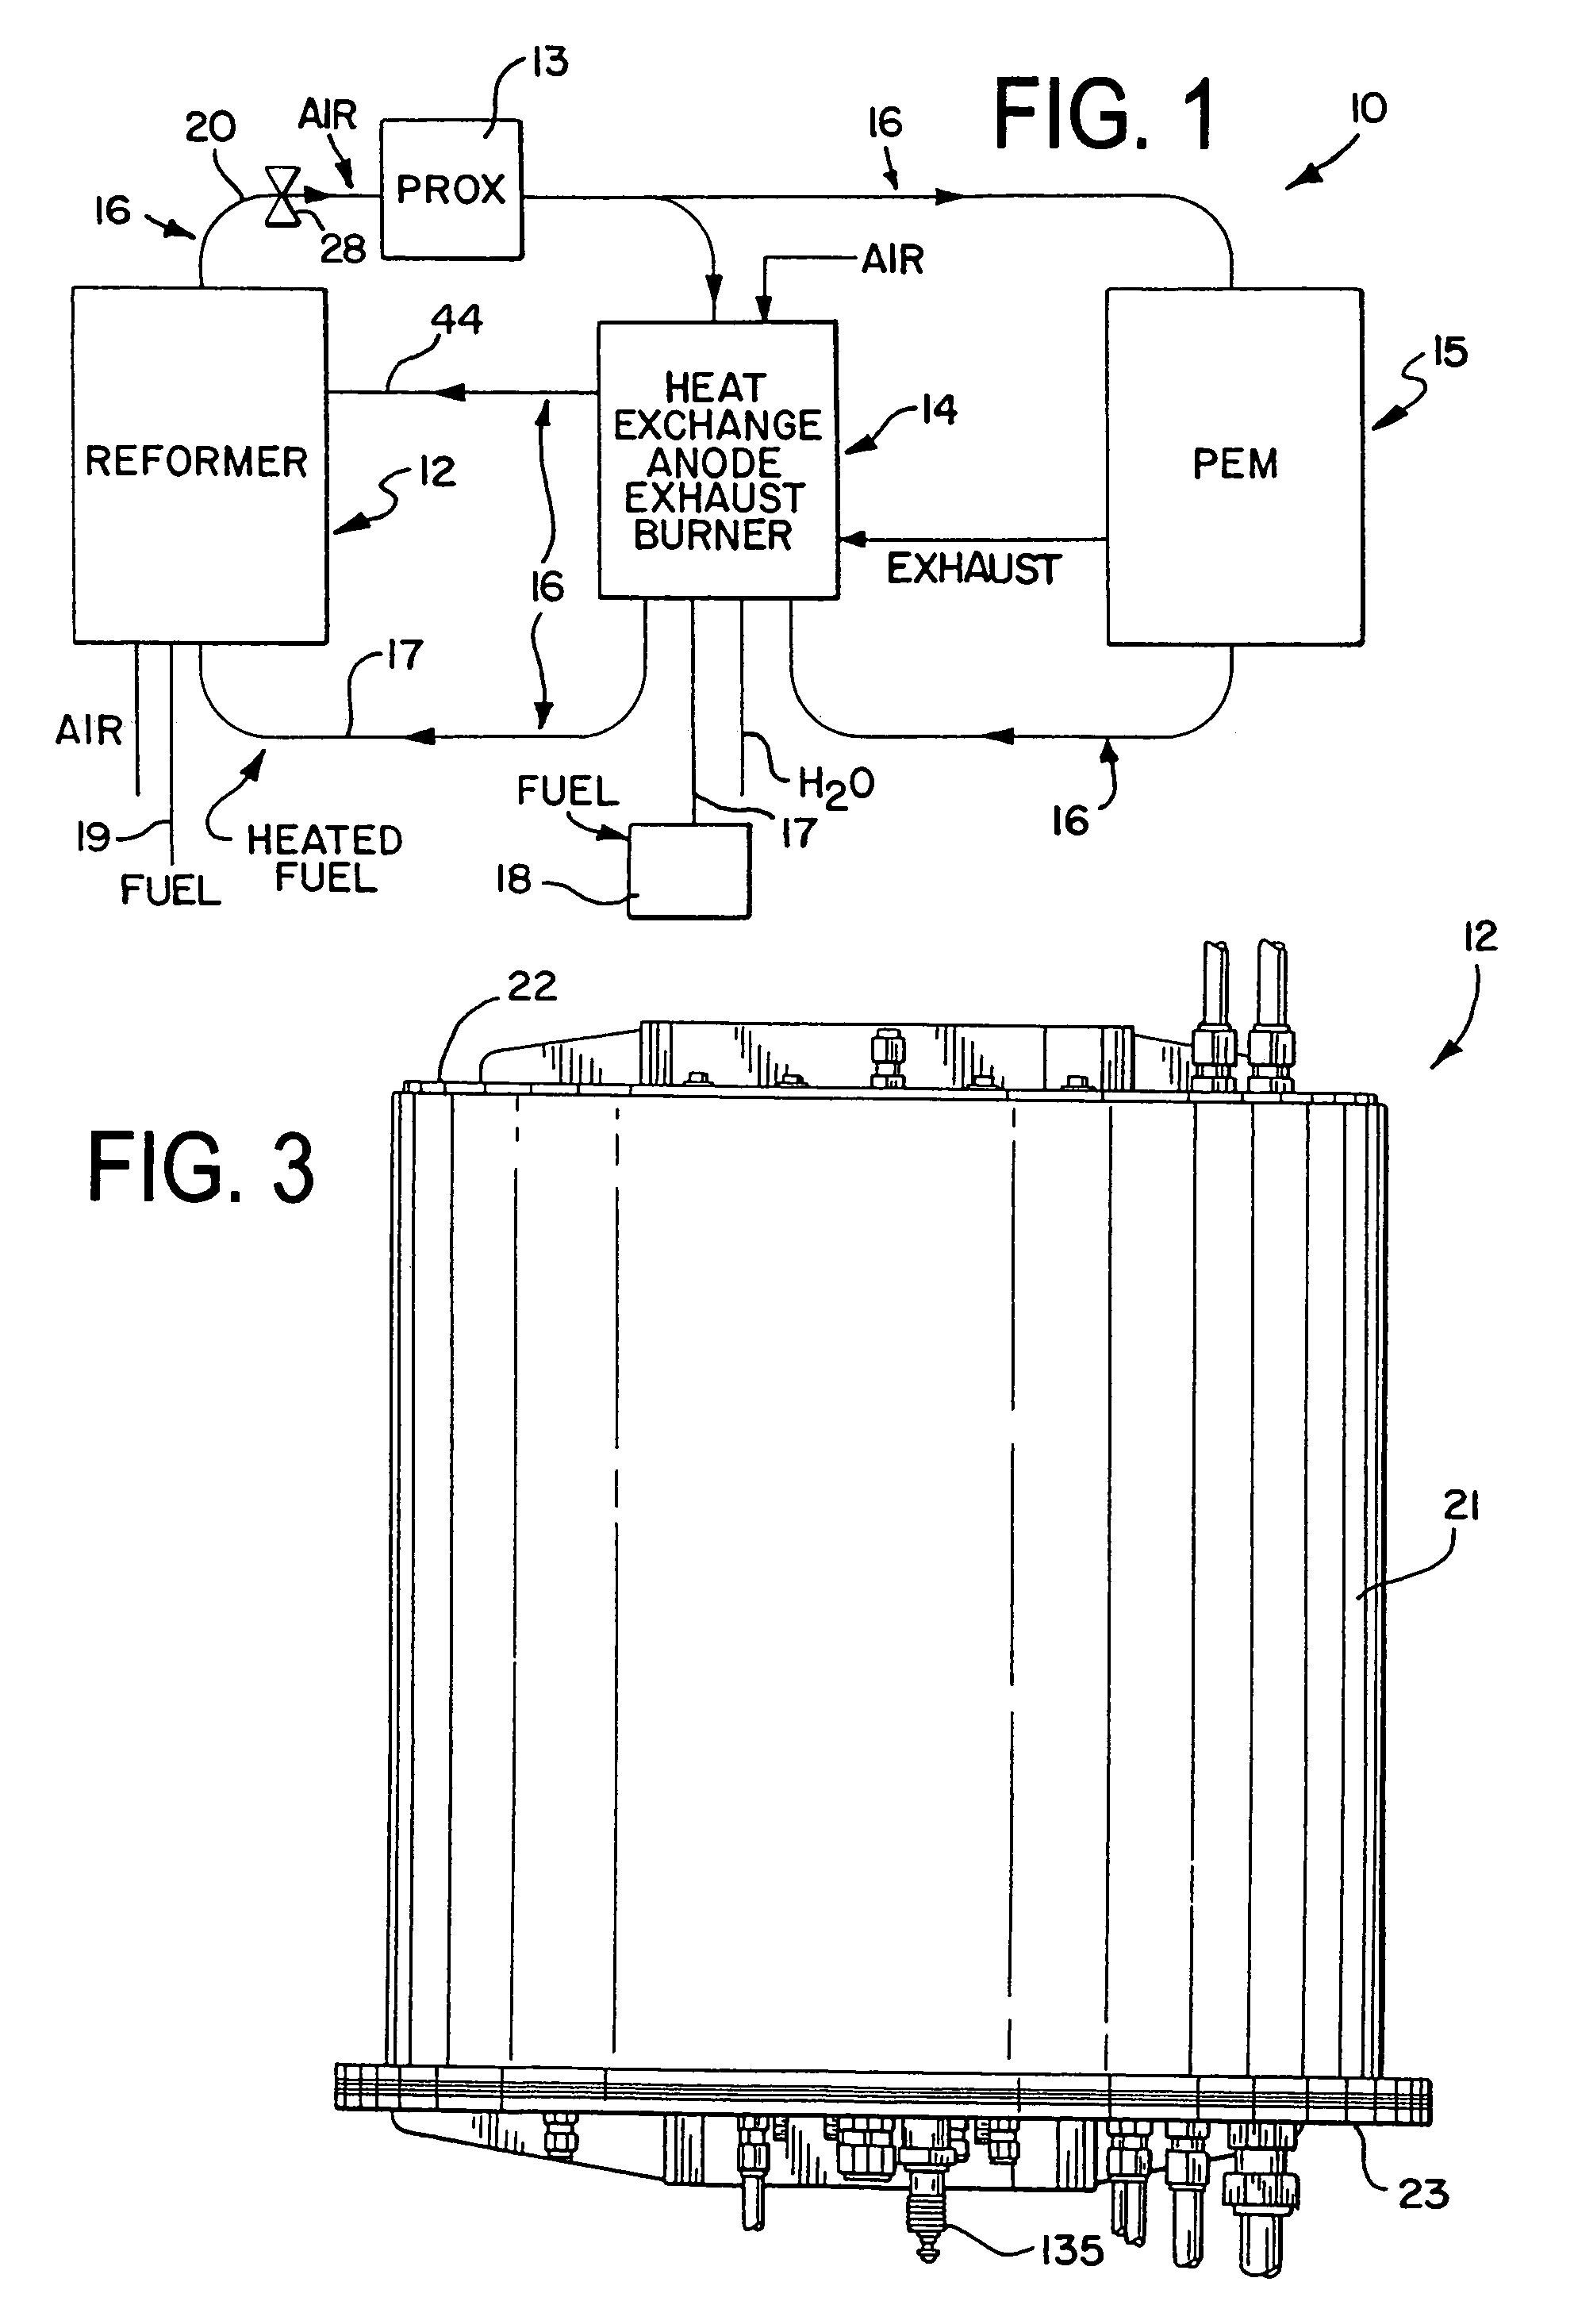 Auxiliary reactor for a hydrocarbon reforming system